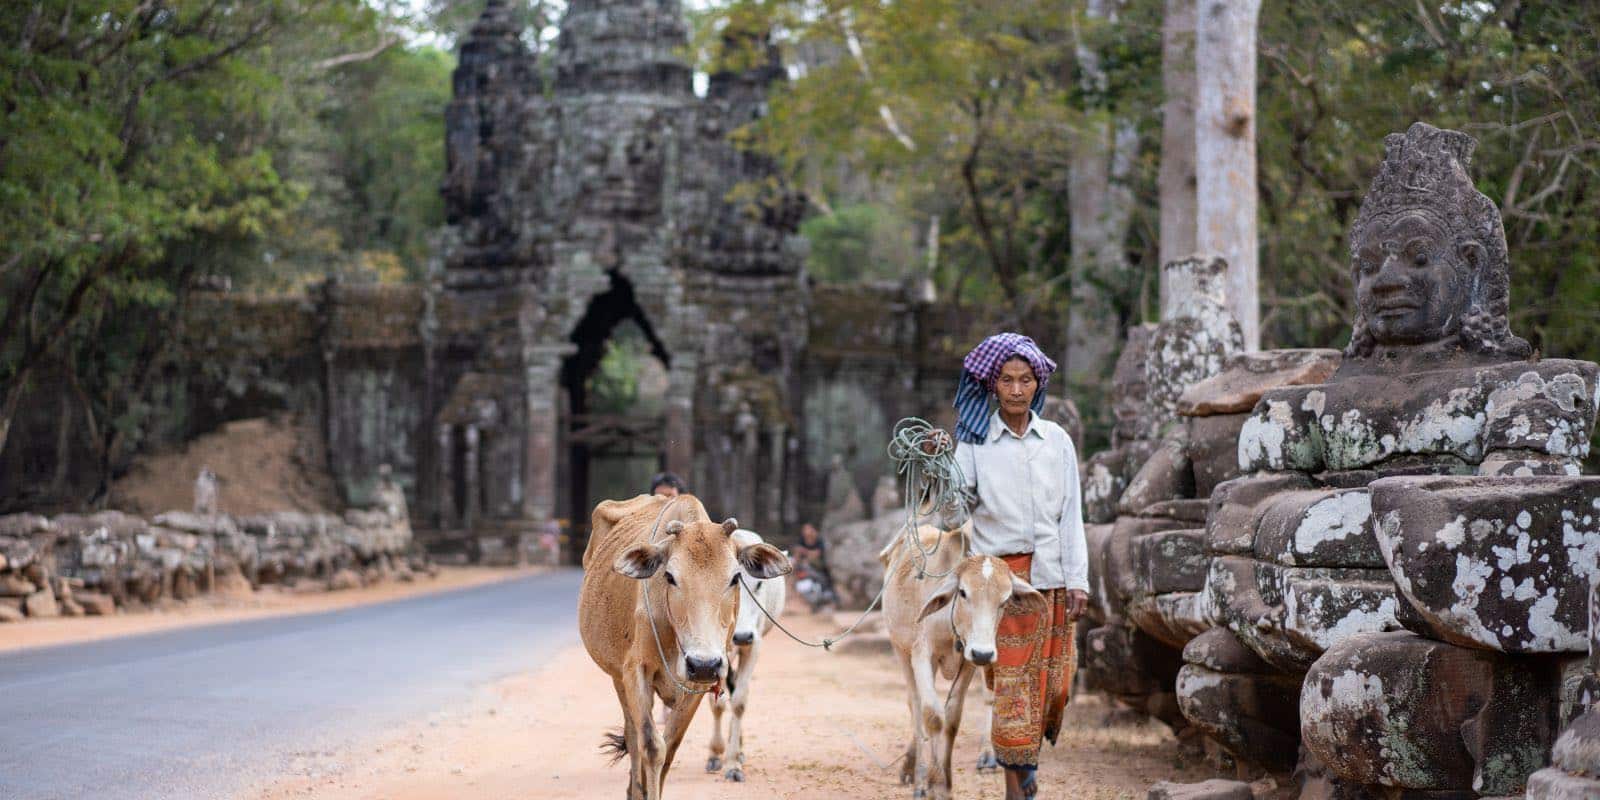 an old woman walking a cow in Angkor Thom, Siem Reap, Cambodia